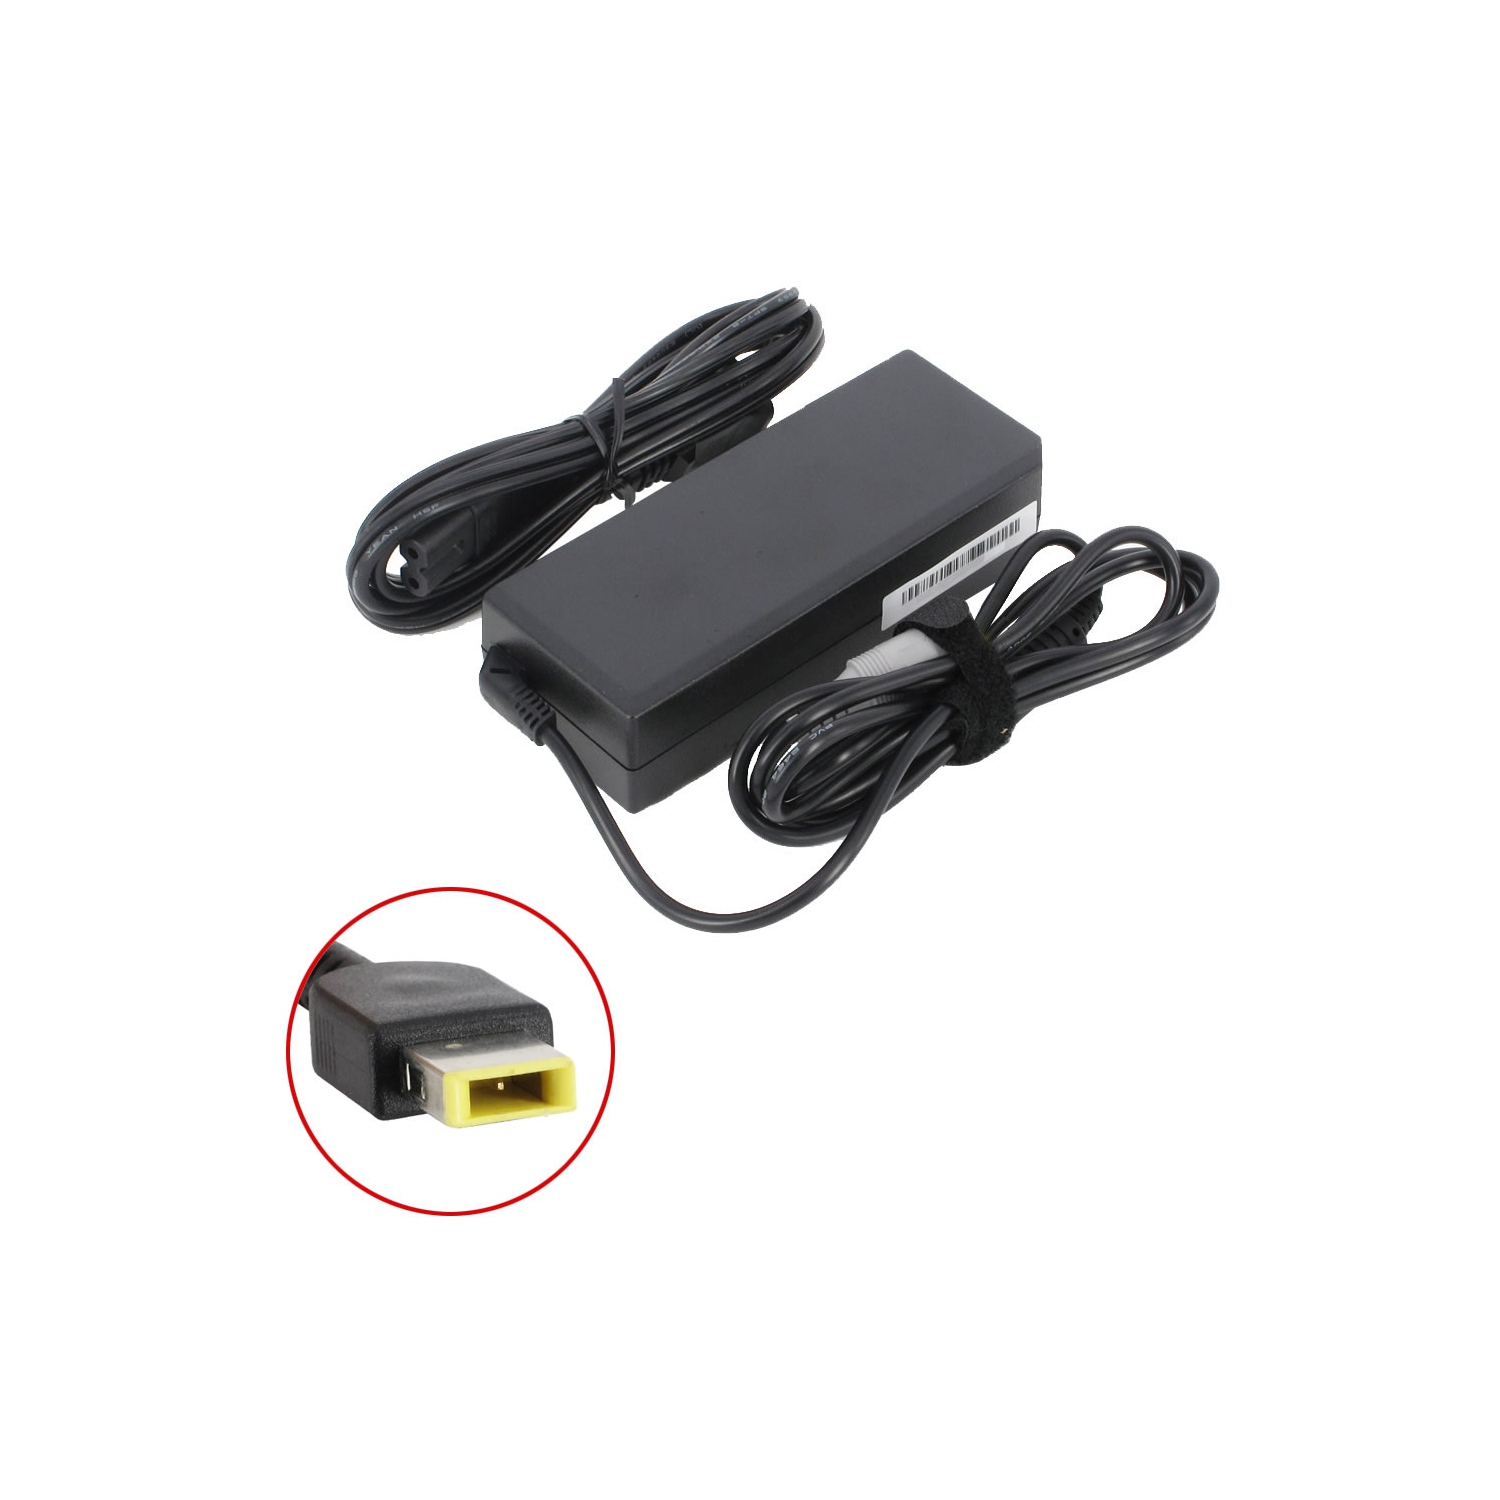 Brand New Laptop AC Adapter for Lenovo IdeaPad Yoga 11S (Touch)-59370528, ADP-65XB A, 0B47481, 45N0293, 45N0482, PA-1650-37LF